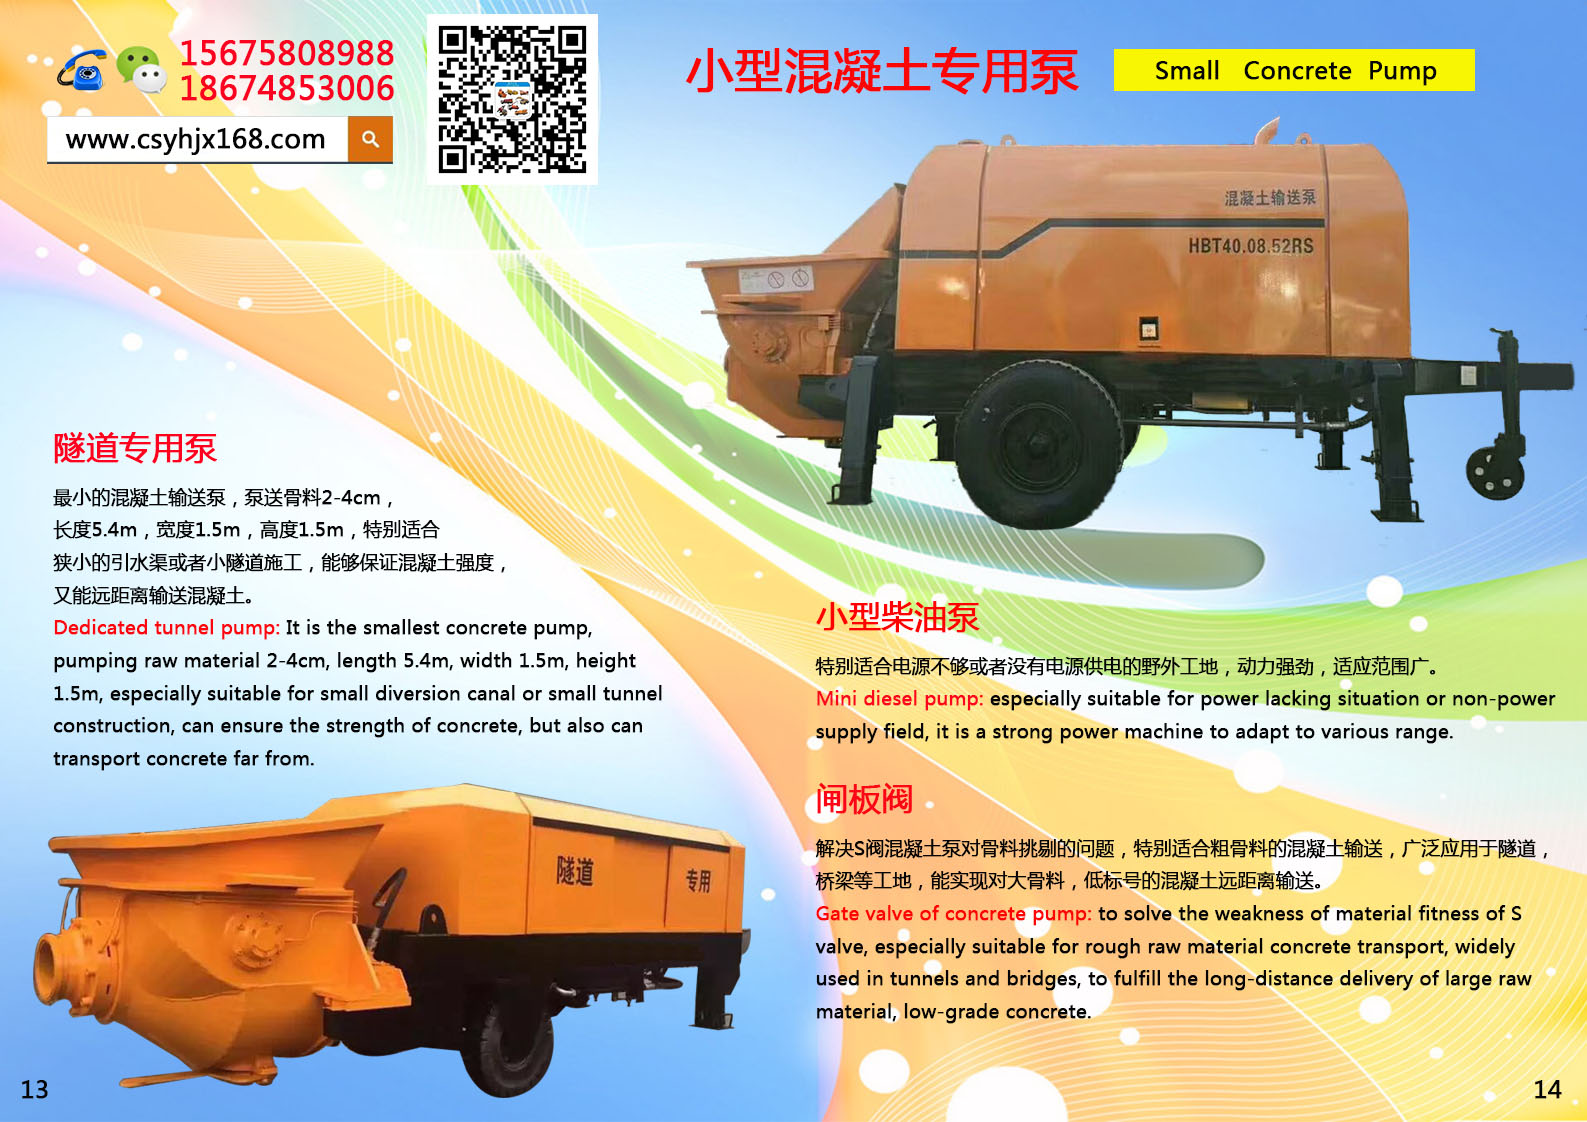 Special pump for small concrete；Stabilized soil mixer